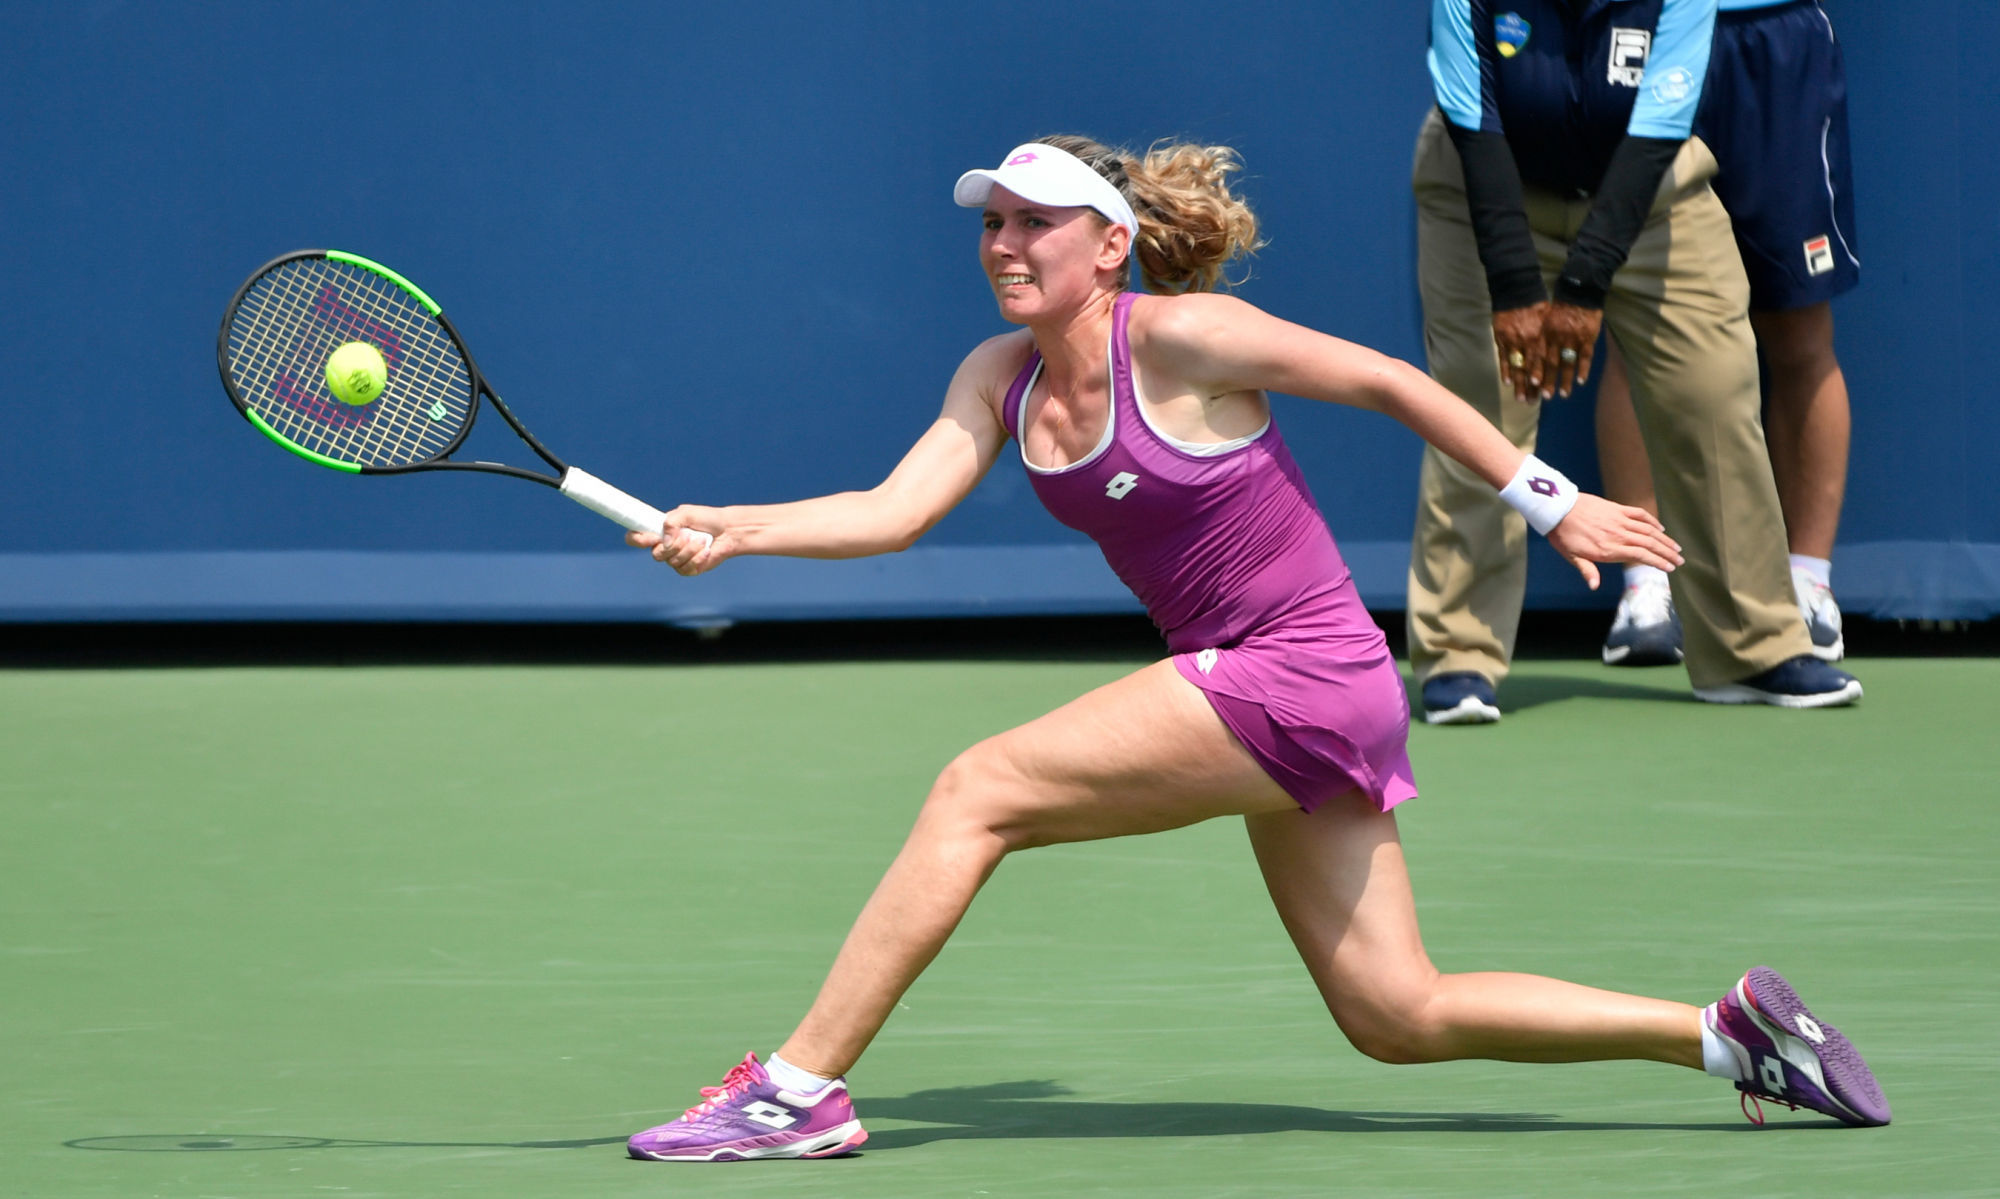 August 14,2019: Ekaterina Alexandrova (RUS loses to Simona Halep (ROU) 3-6, 7-5, 6-4, at the Western & Southern Open being played at Lindner Family Tennis Center in Mason, Ohio. Photo : SUSA / Icon Sport